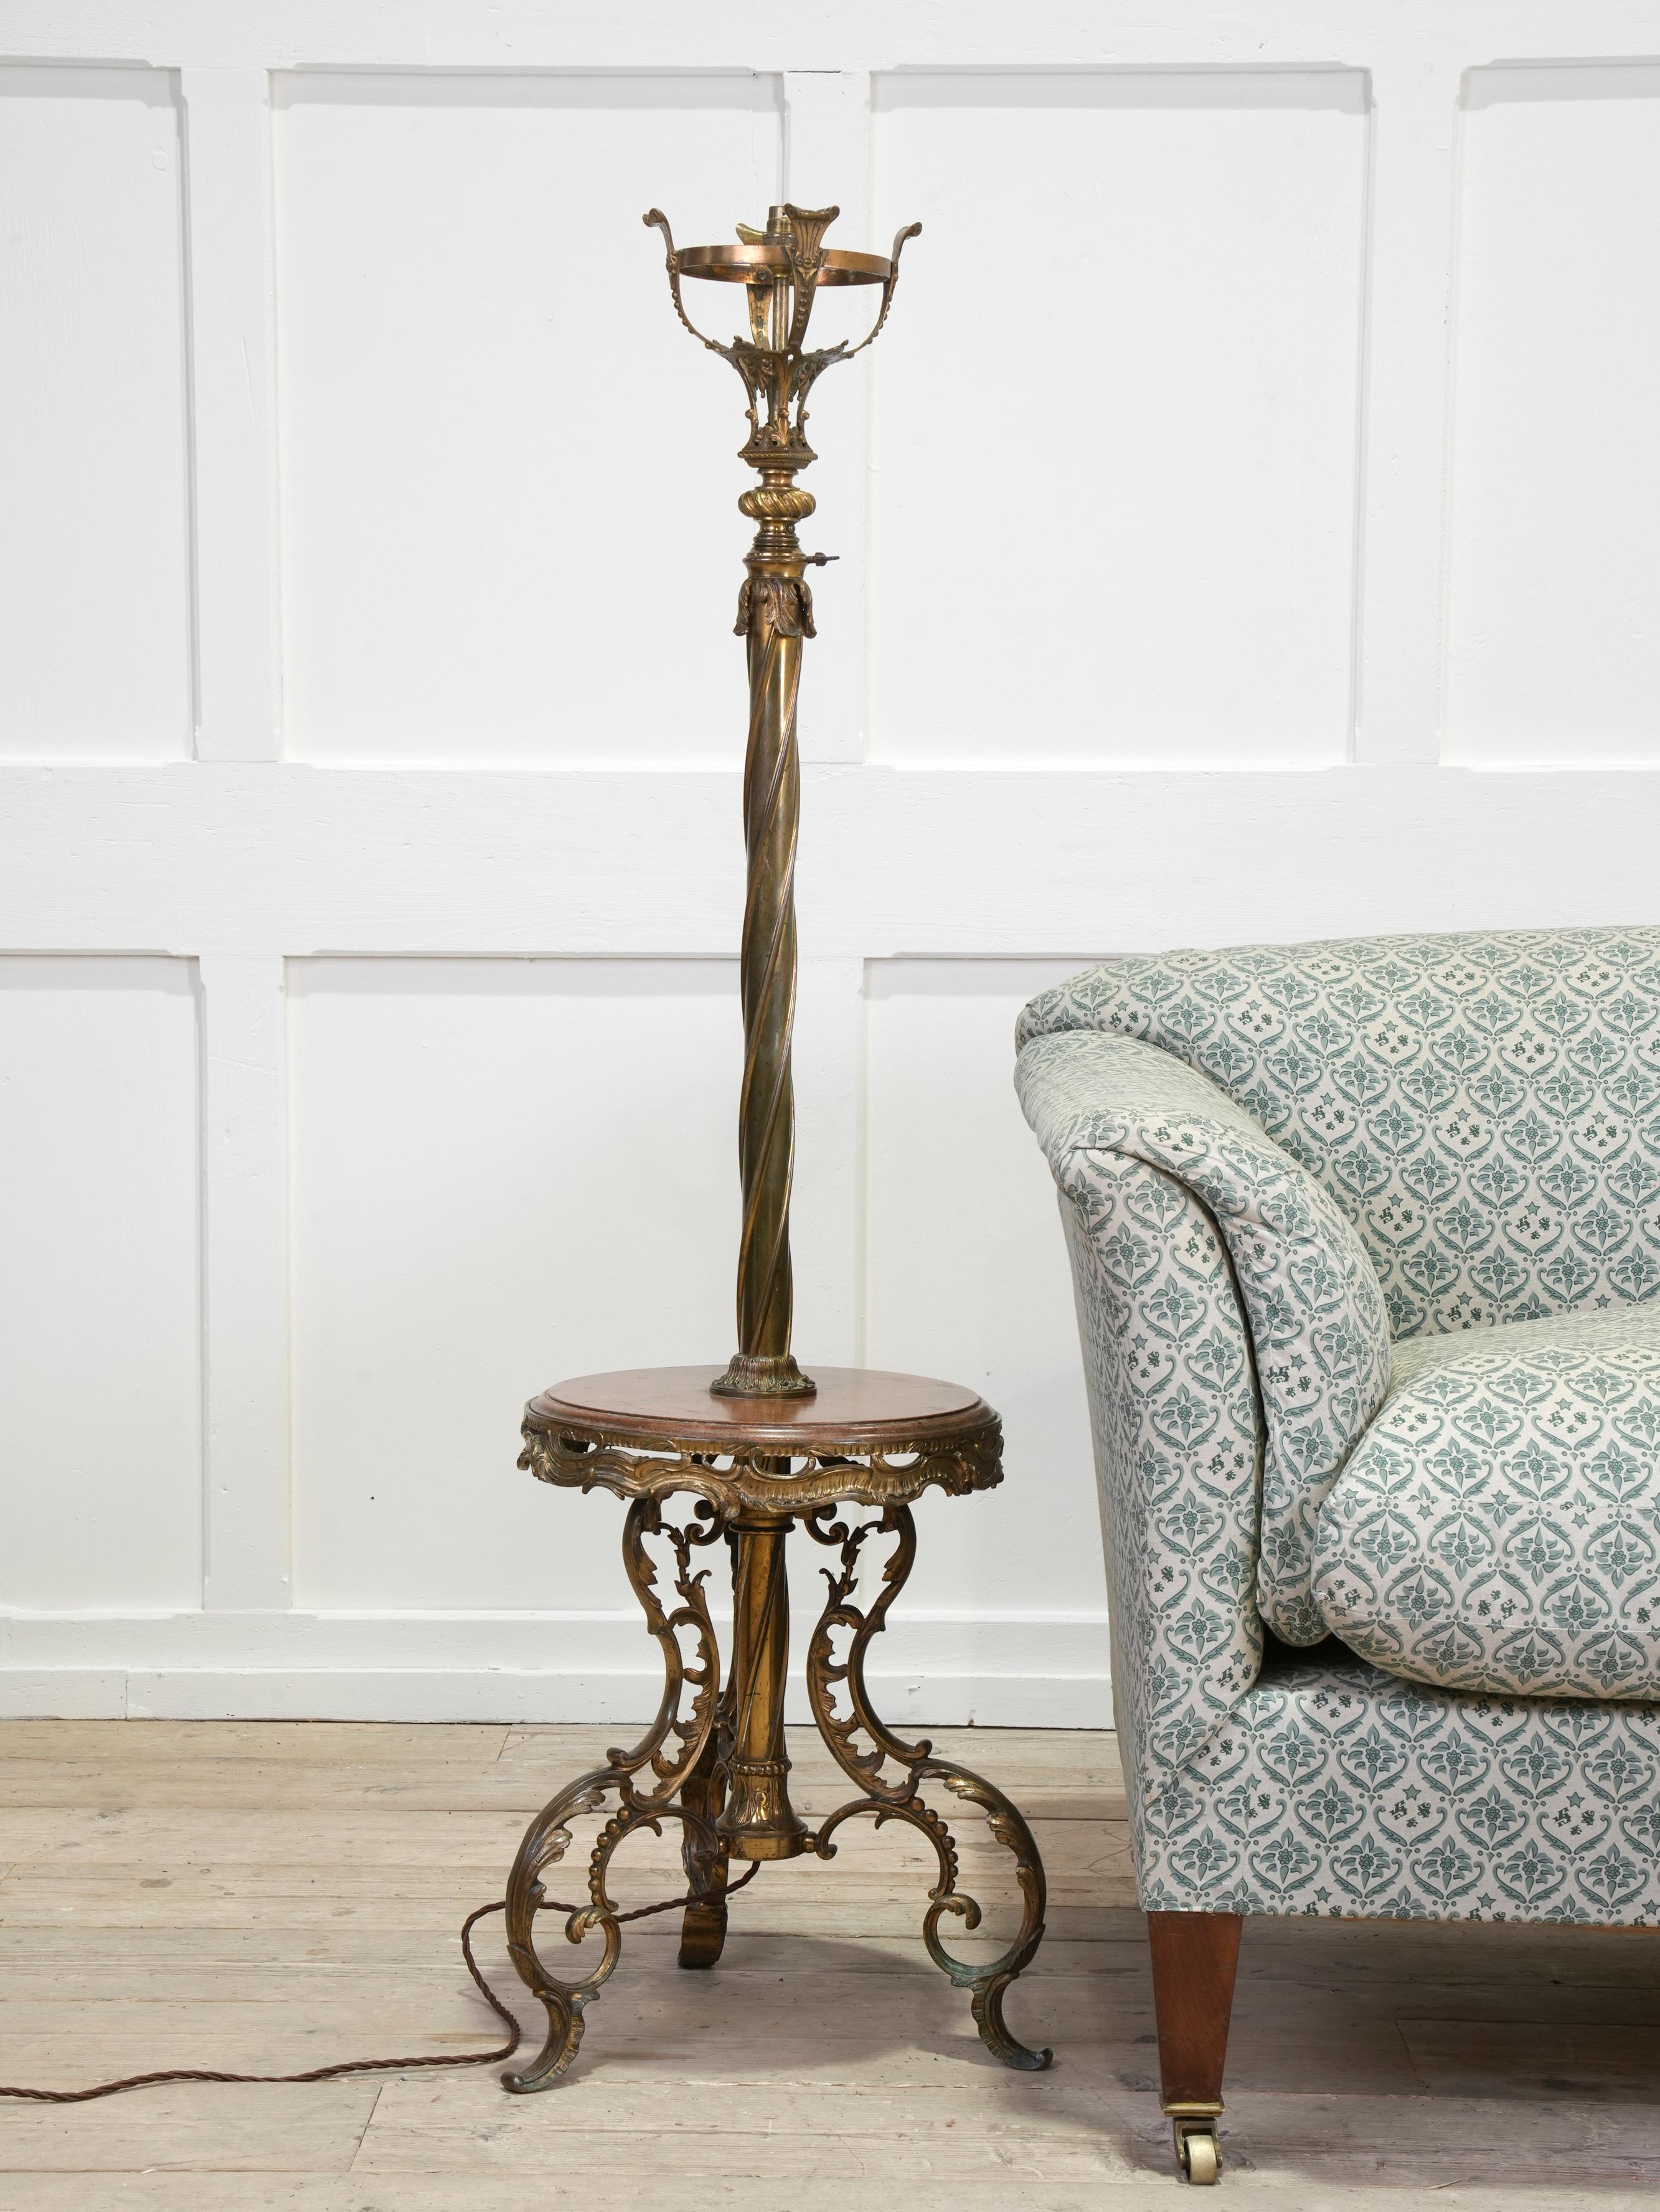 An outrageous gilt brass adjustable standard lamp with a low oak shelf, converted to electricity.